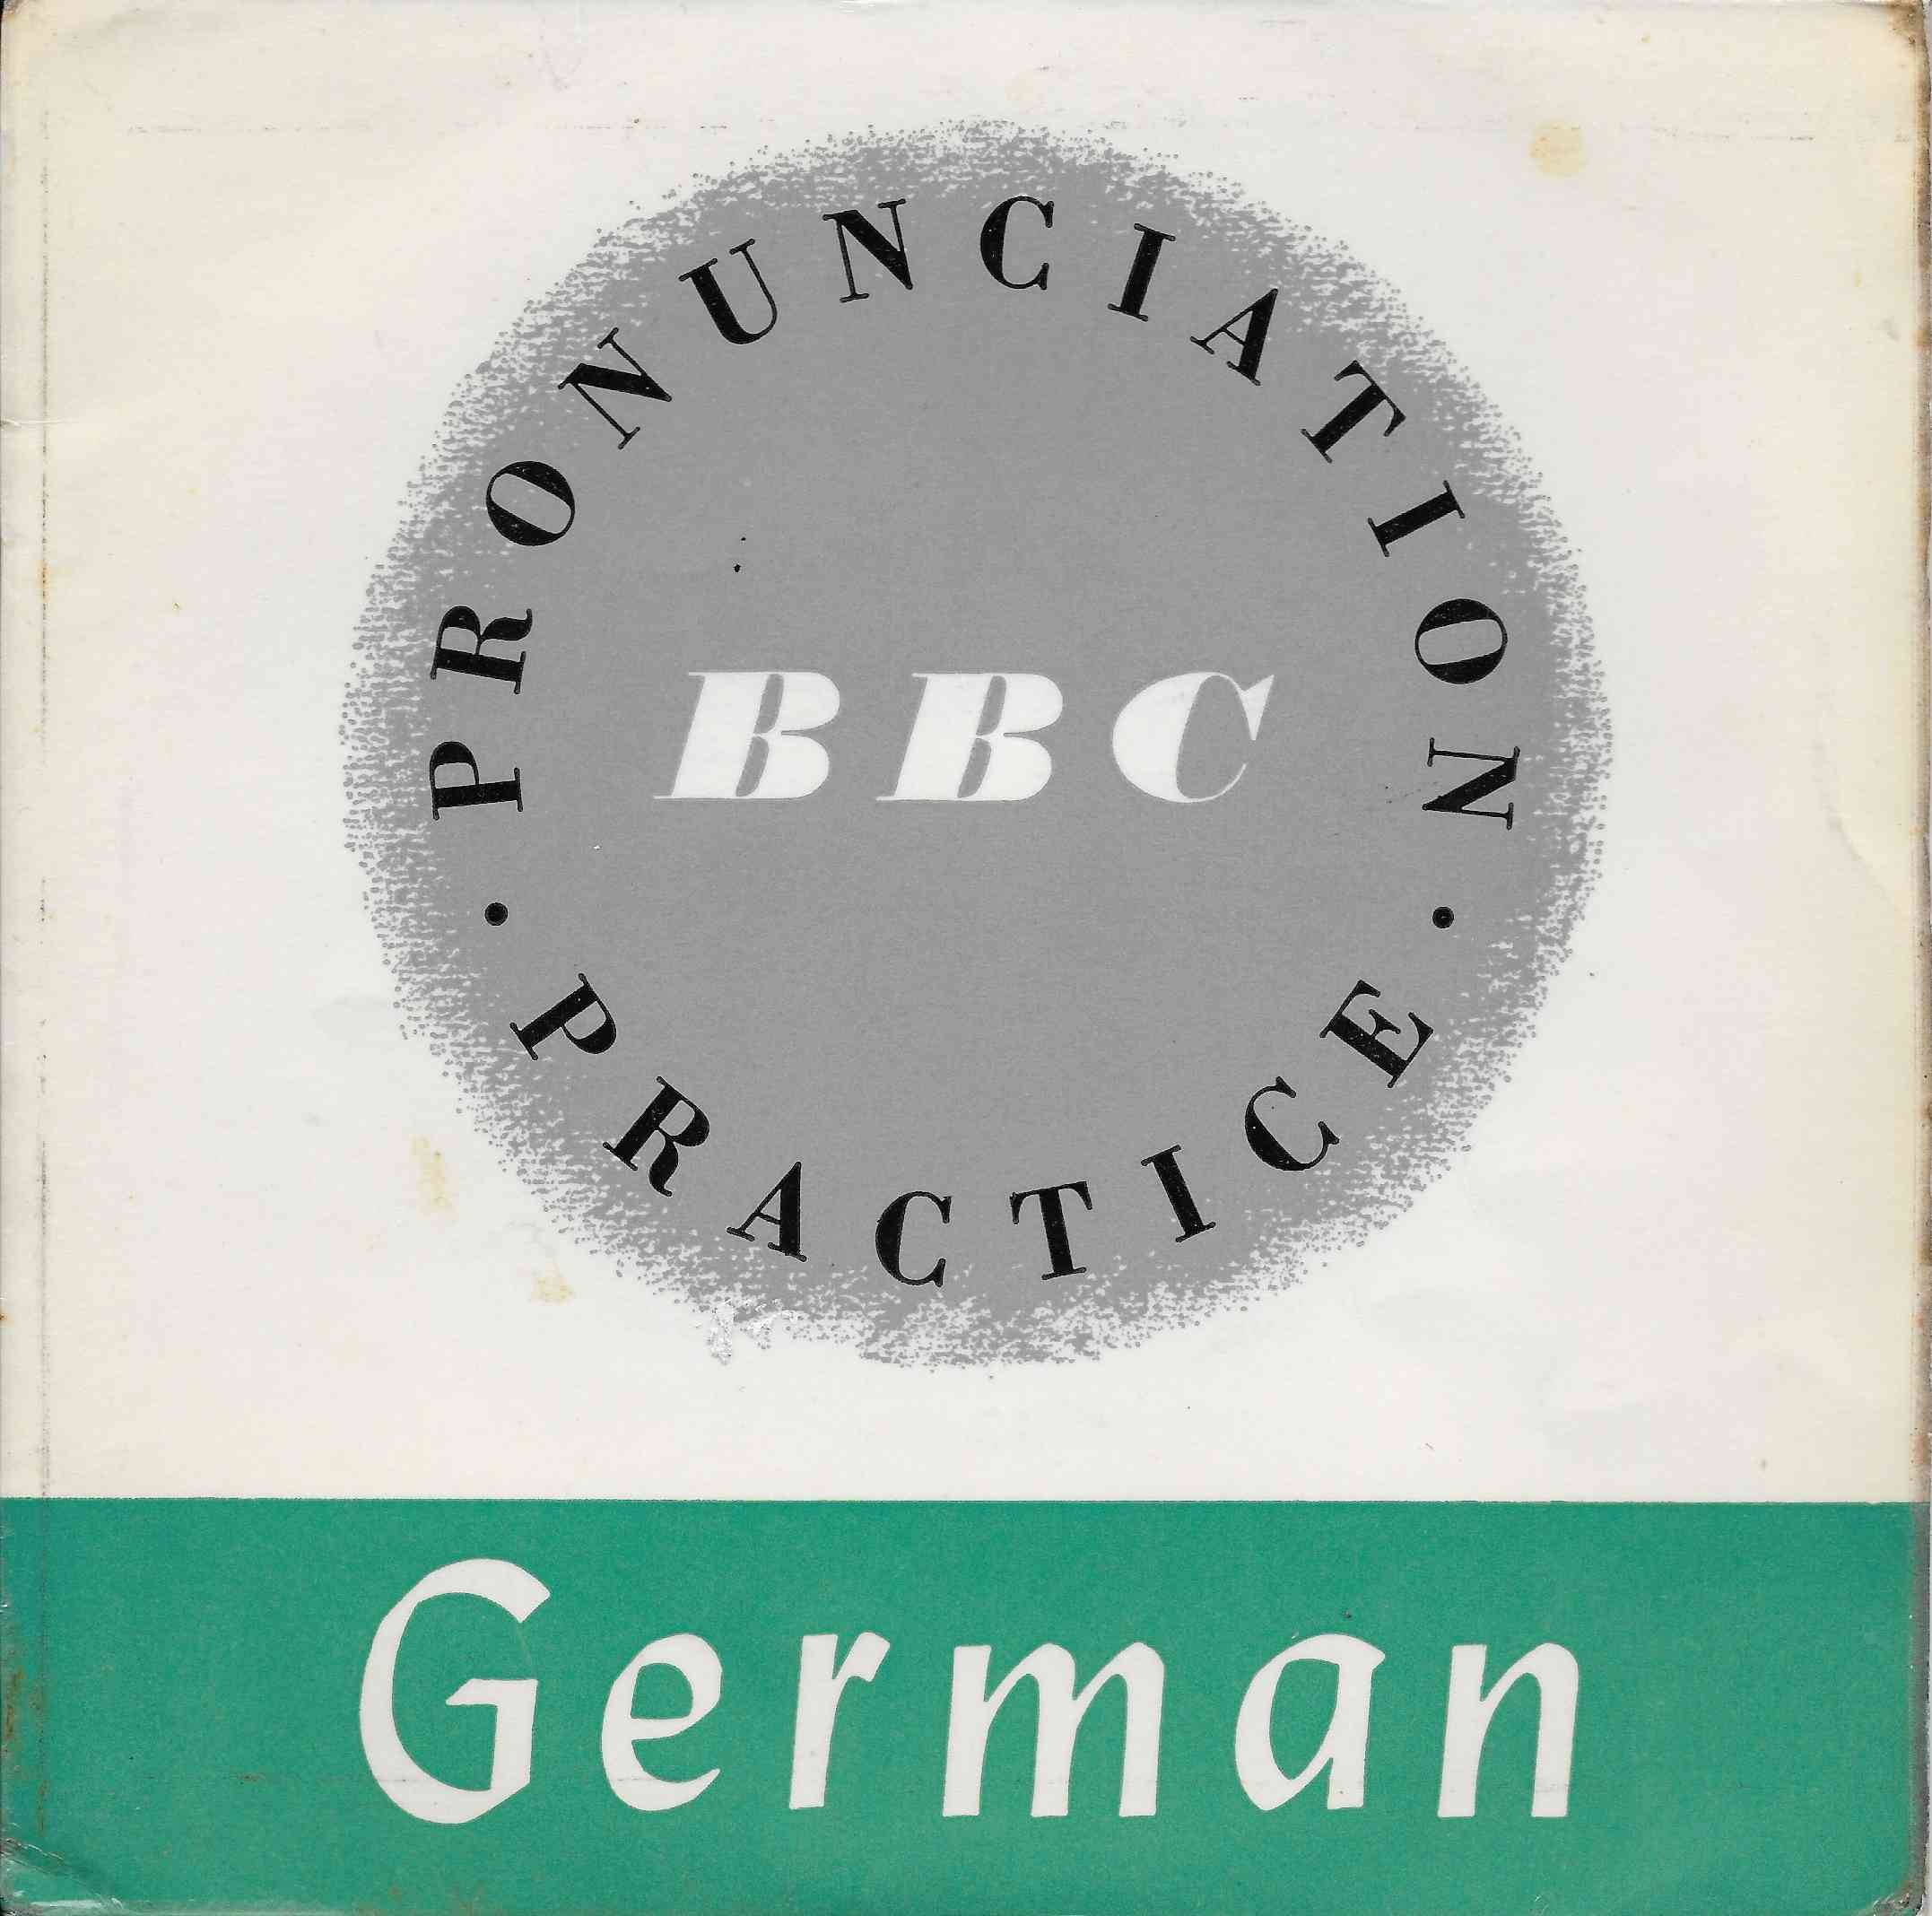 Picture of GER-A-1 German by artist John L. M. Trim from the BBC records and Tapes library